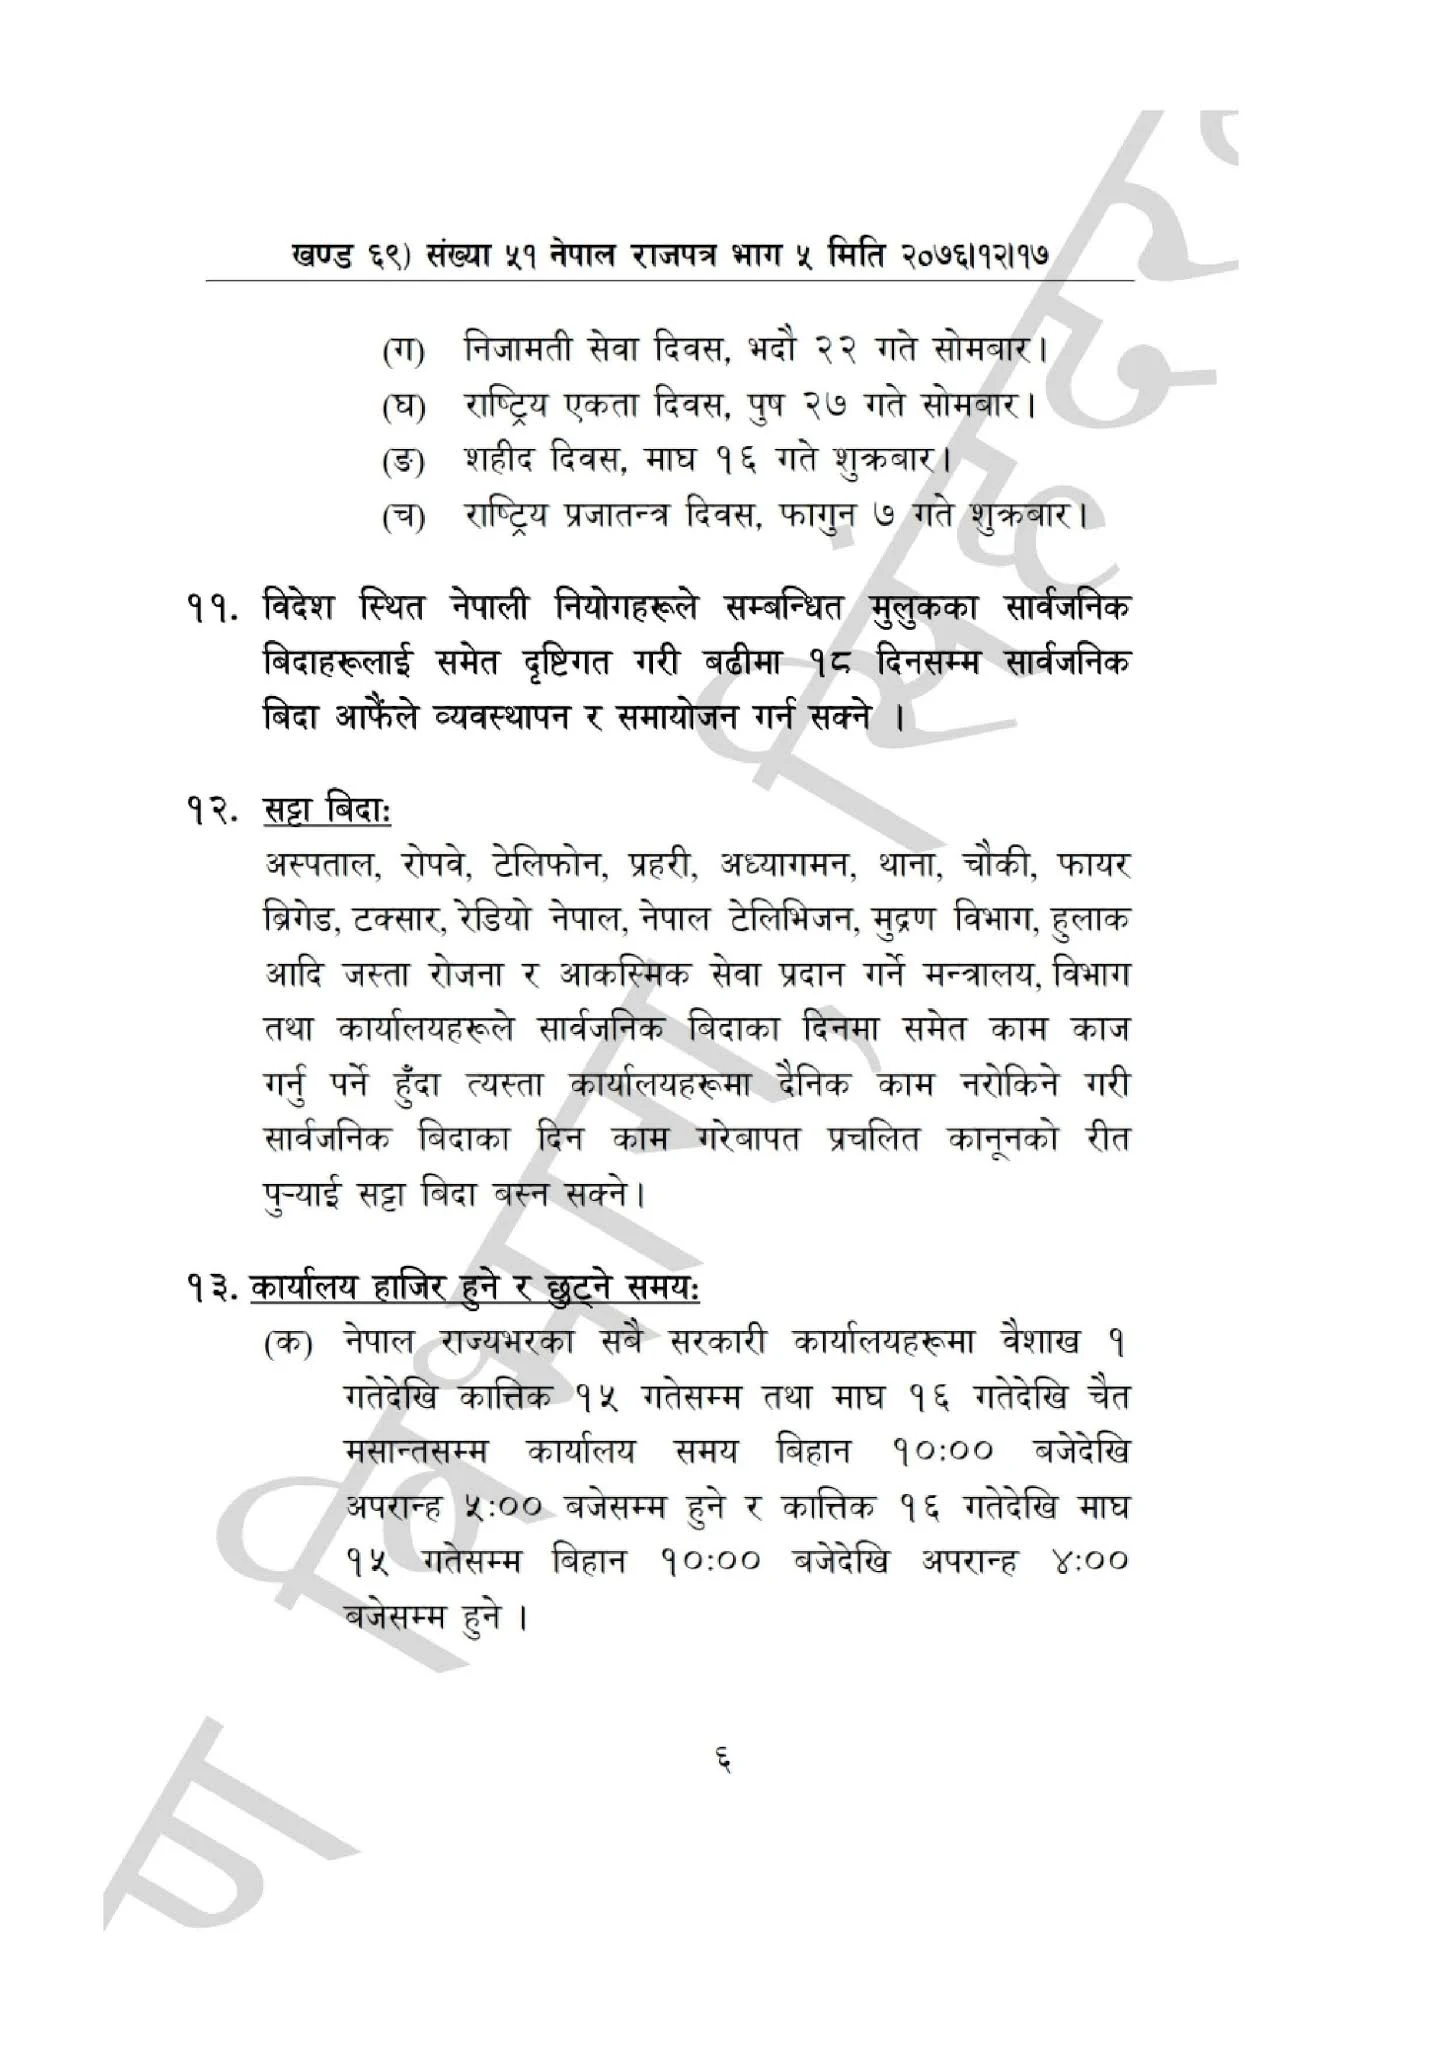 List of Public Holidays in Nepal 2077